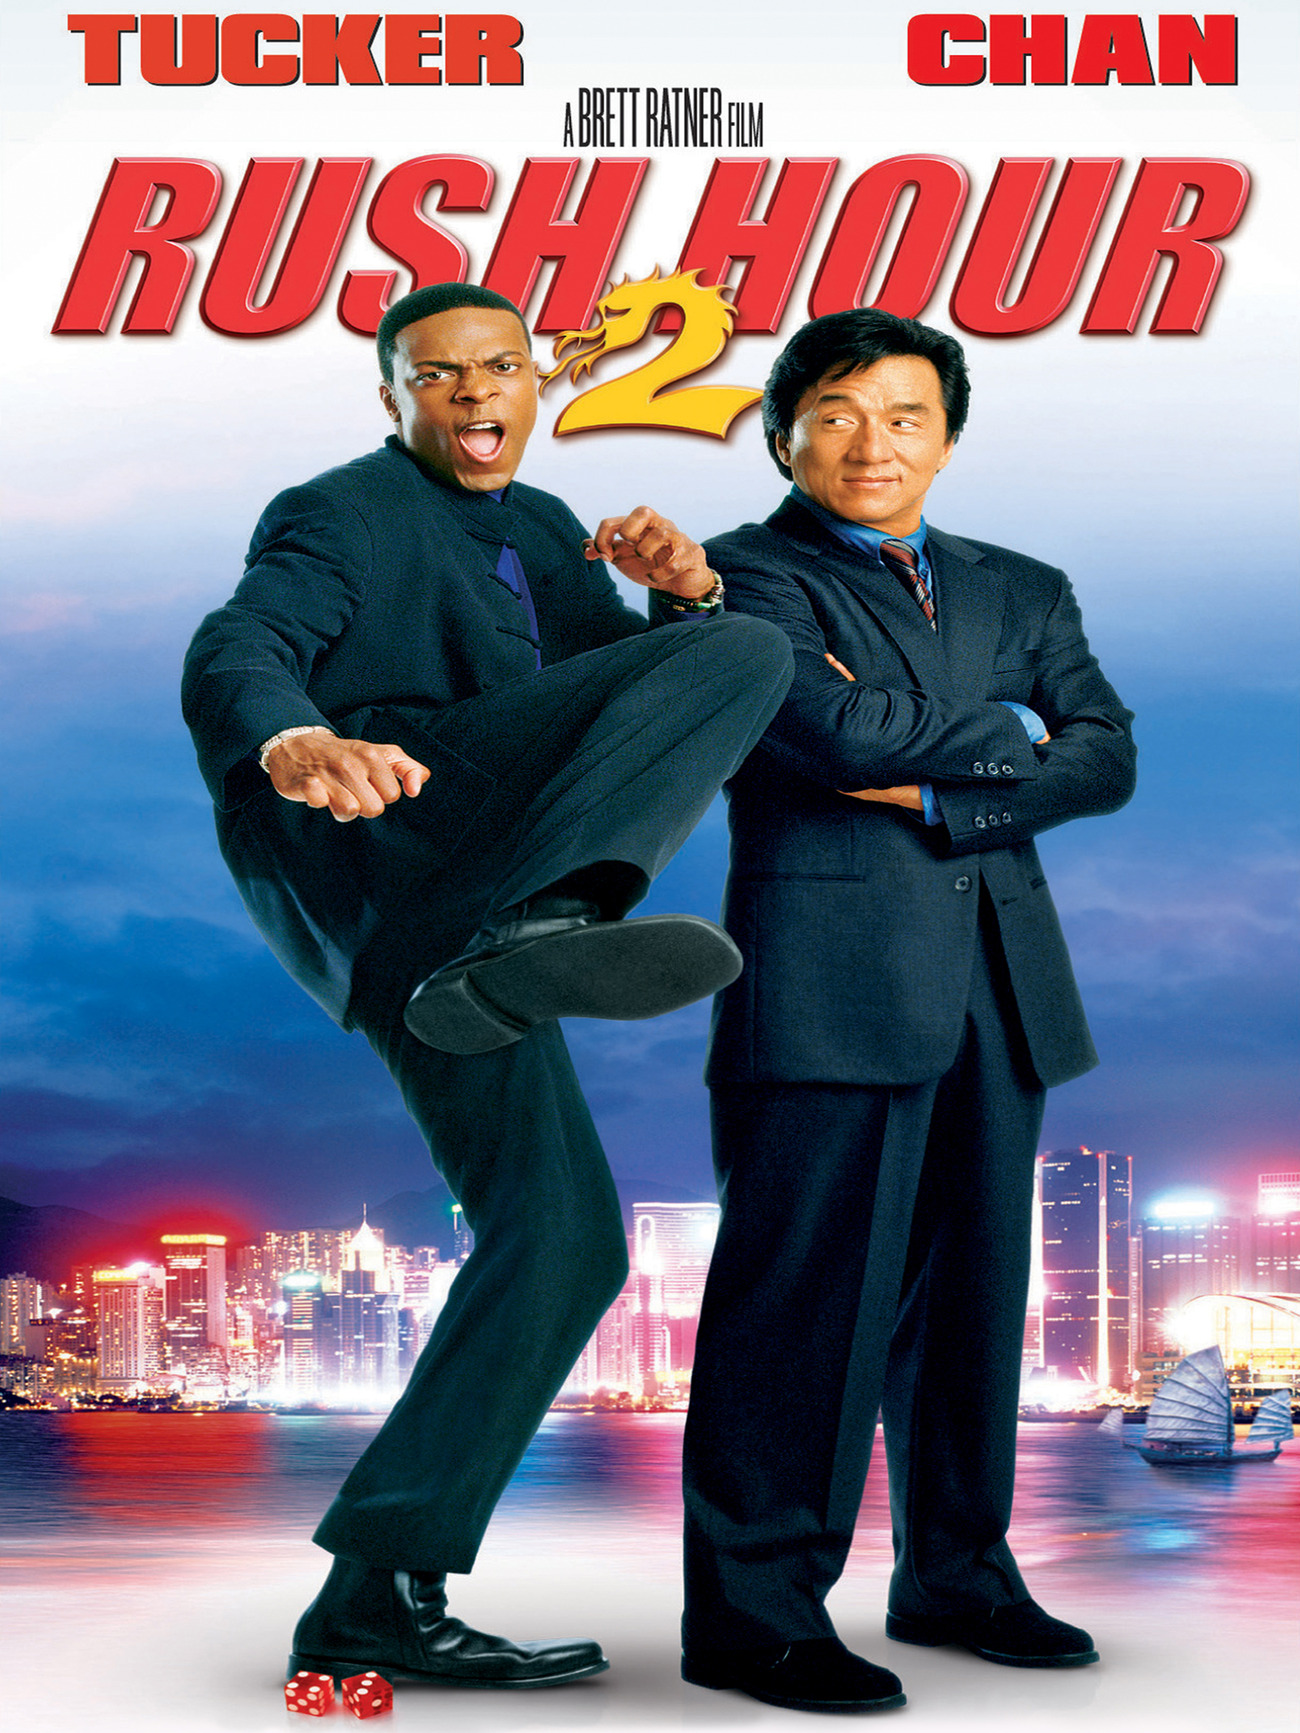 Rush Hour 2 wallpapers, Movie, HQ Rush Hour 2 pictures | 4K Wallpapers 2019